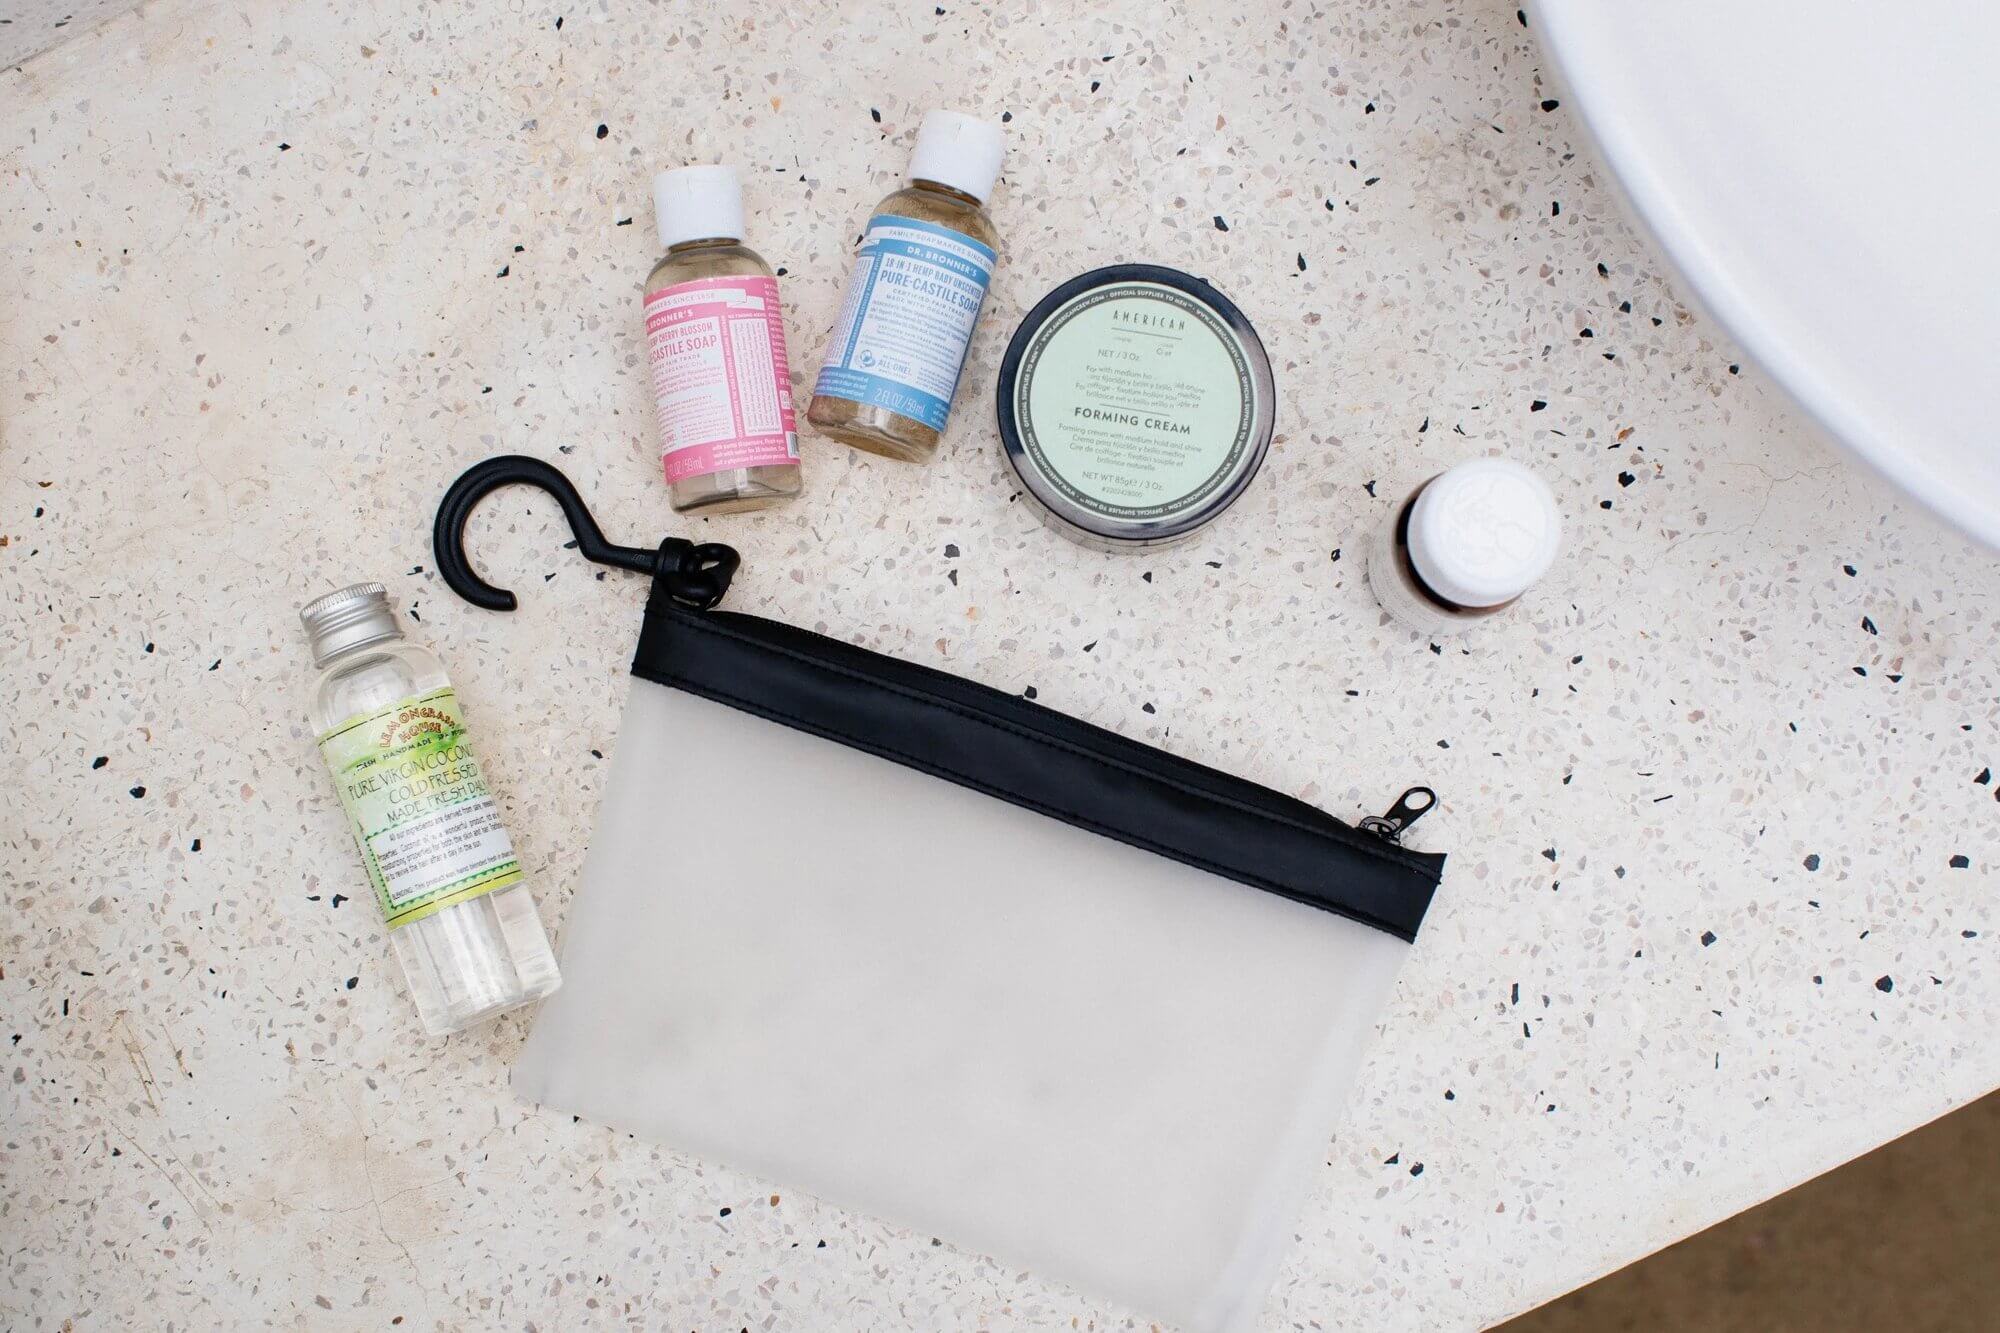 The Complete Travel Toiletries List - Pack Right Every Time!  Travel size  toiletries, Toiletries list, Packing toiletries